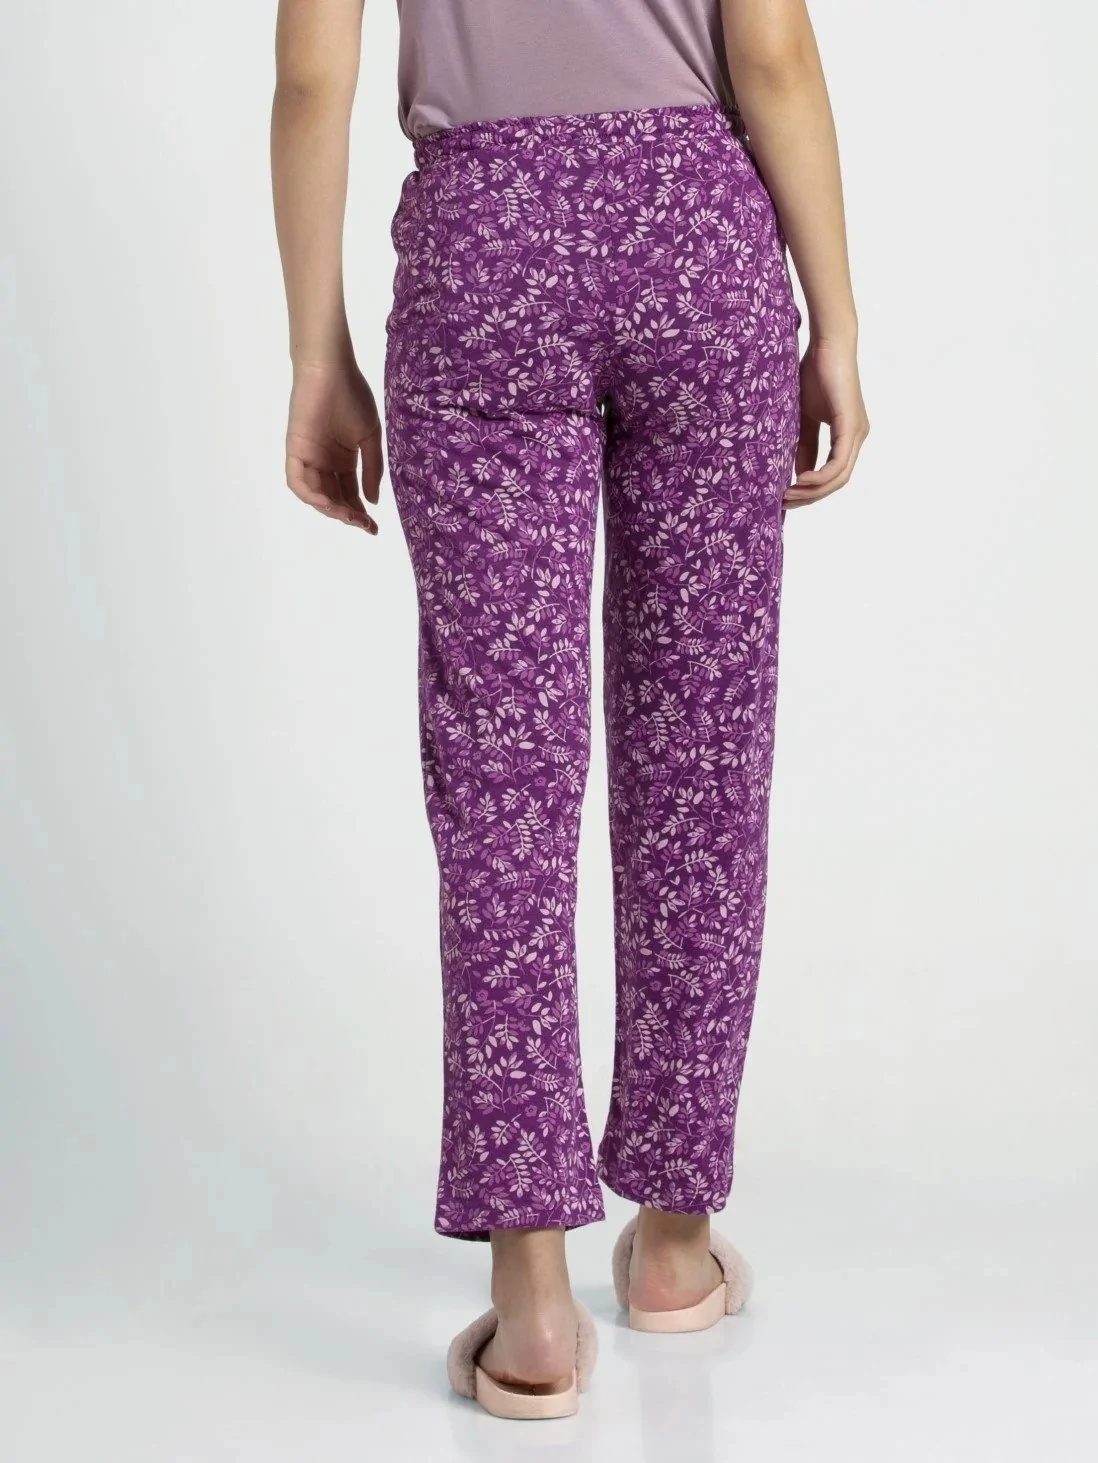 Small Jockey Lavendor Scent Print59 Knit Lounge Pants at Rs 799/piece in  Chikmagalur